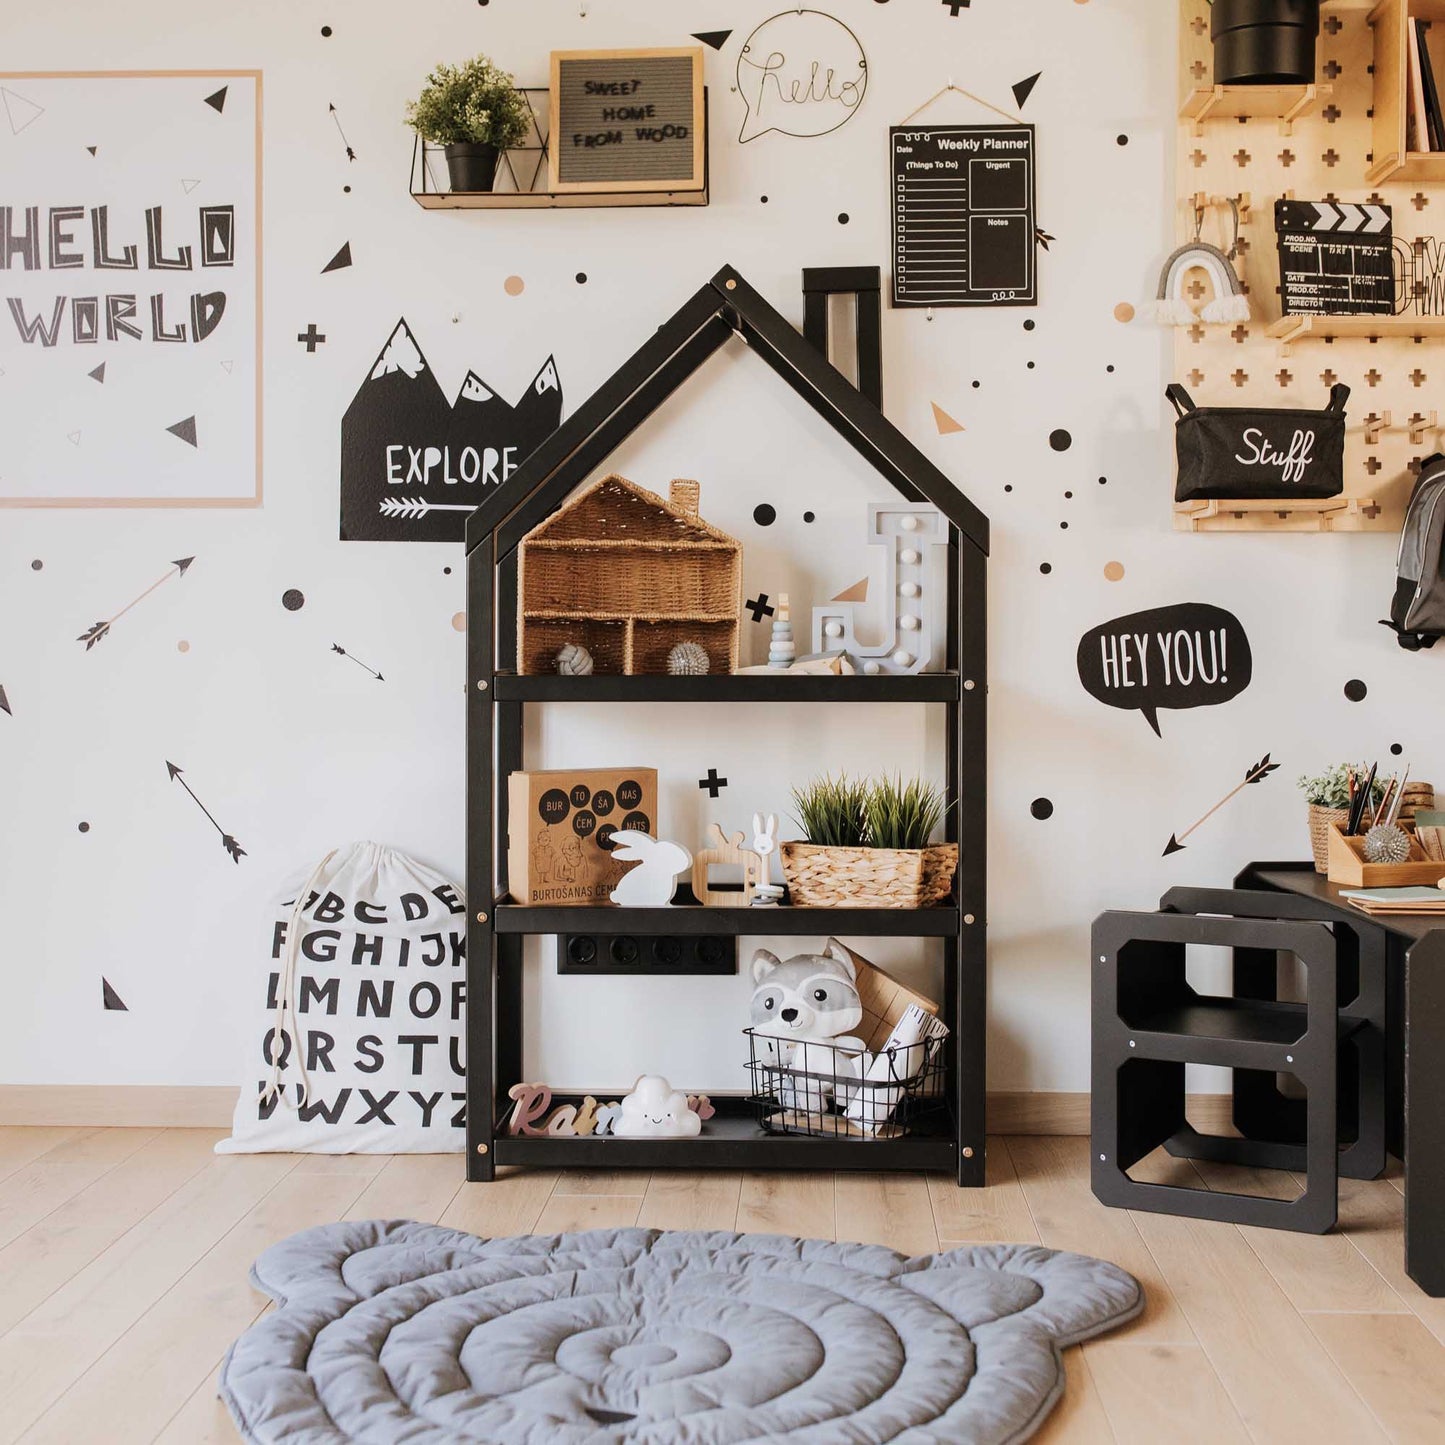 A children's room with a black and white theme, featuring a Sweet Home From Wood house-shaped Montessori toy shelf.